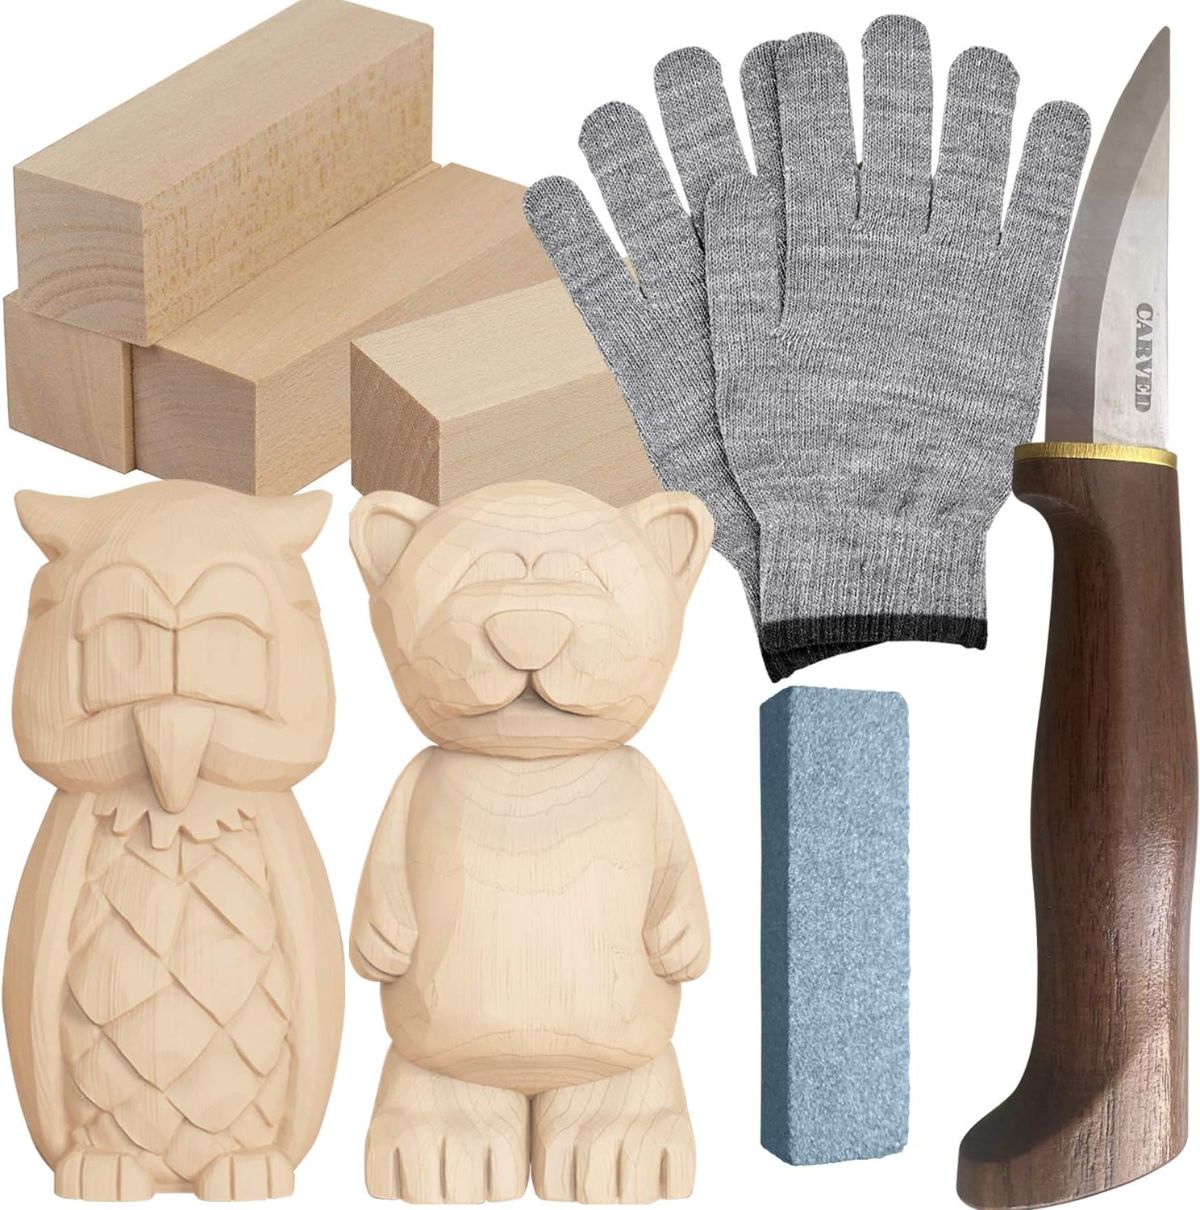 Owl and Bear Wood Carving Kit